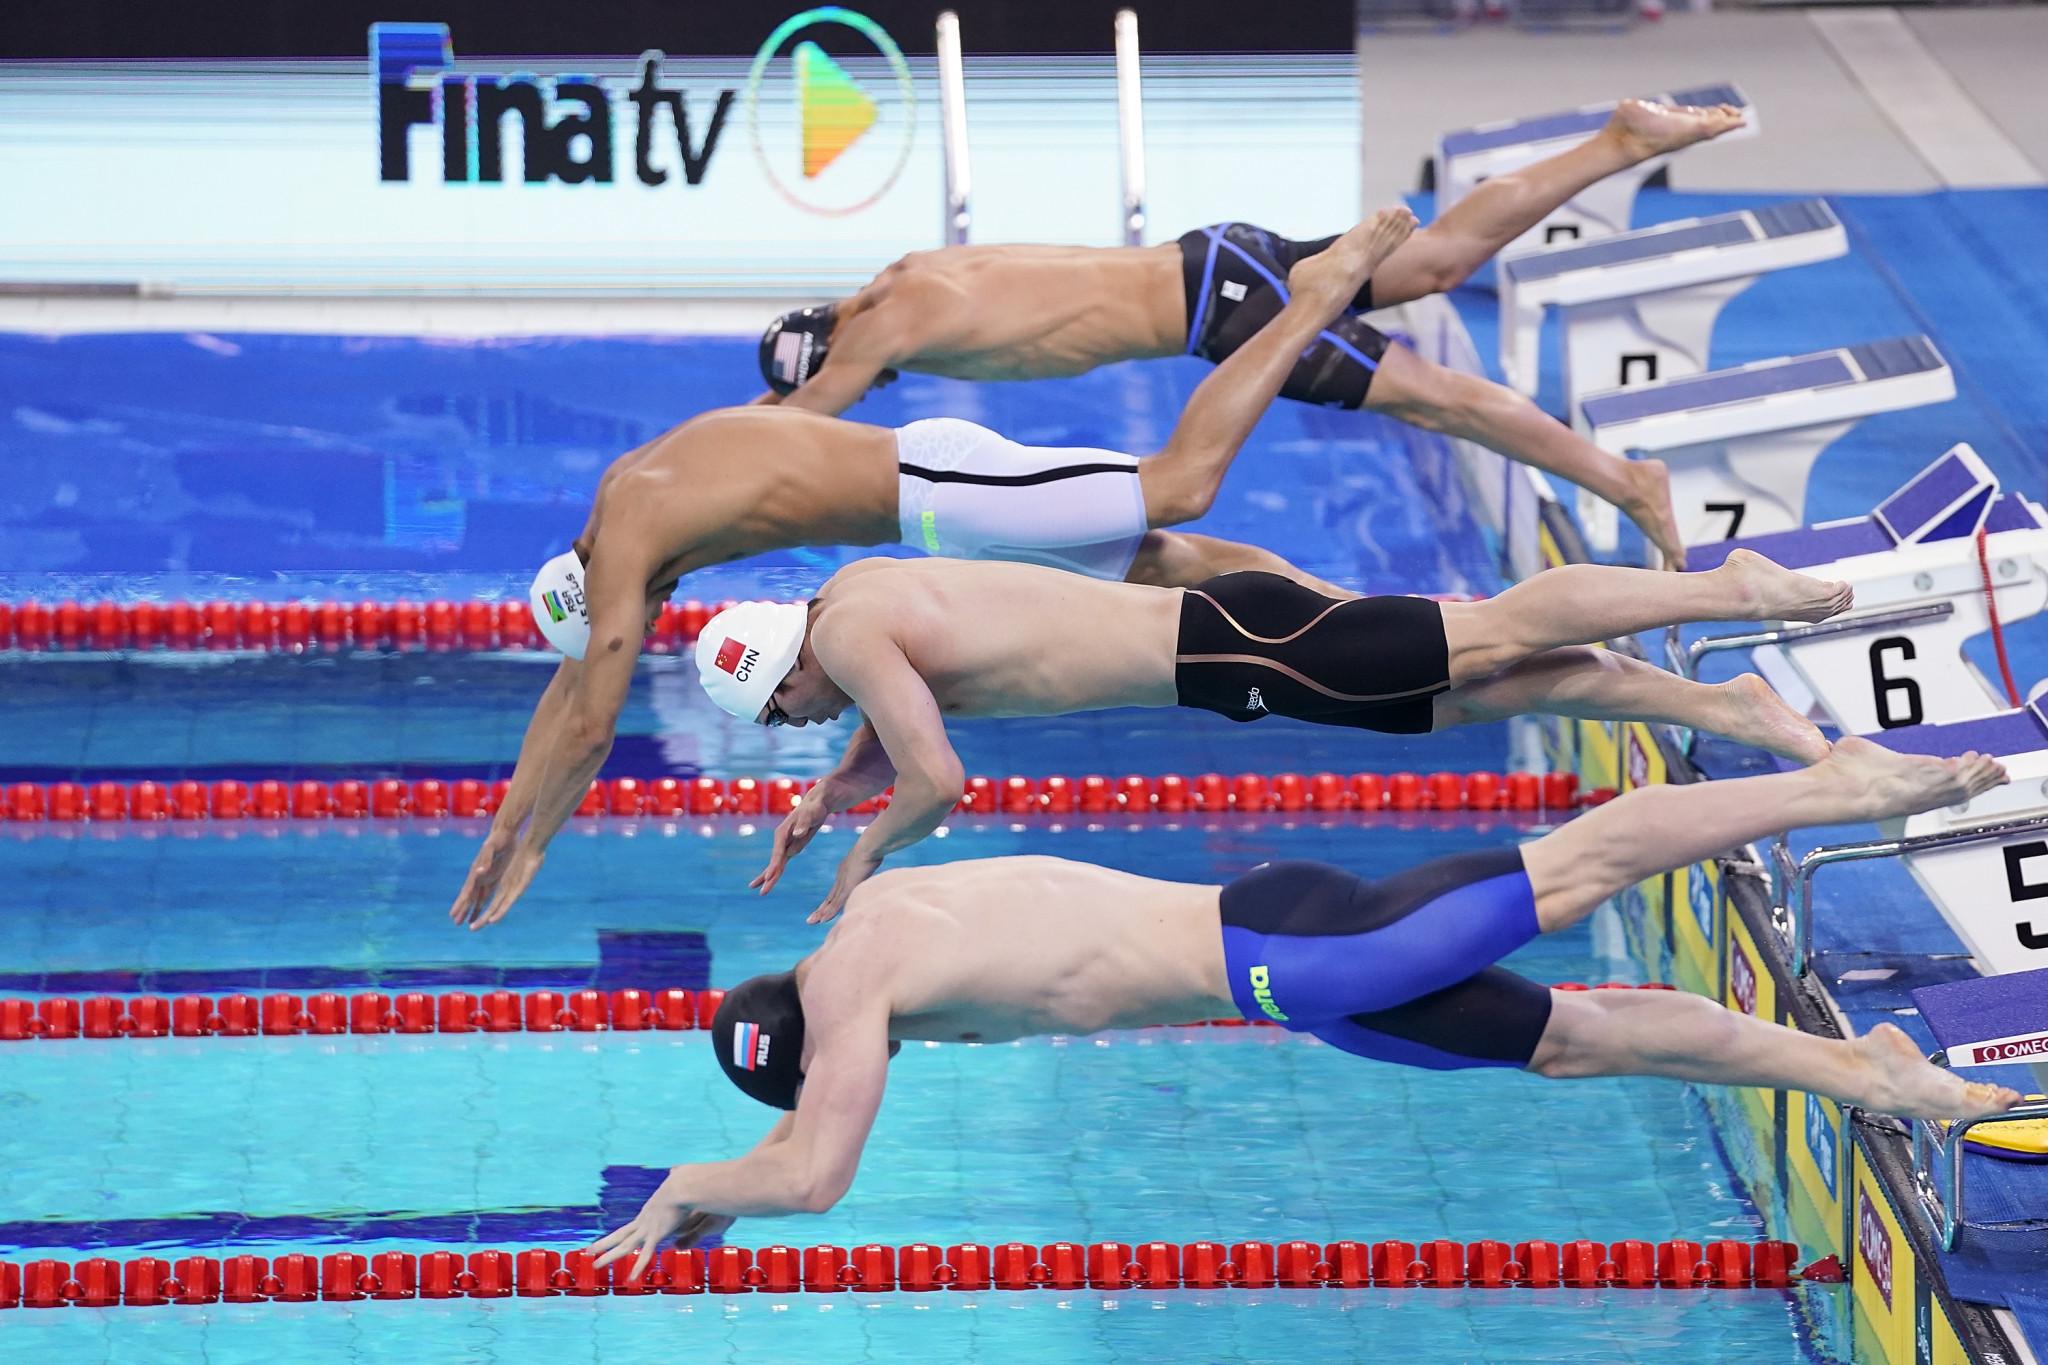 FINA reveals 20 doping tests conducted at opening Champions Swim Series event in Guangzhou